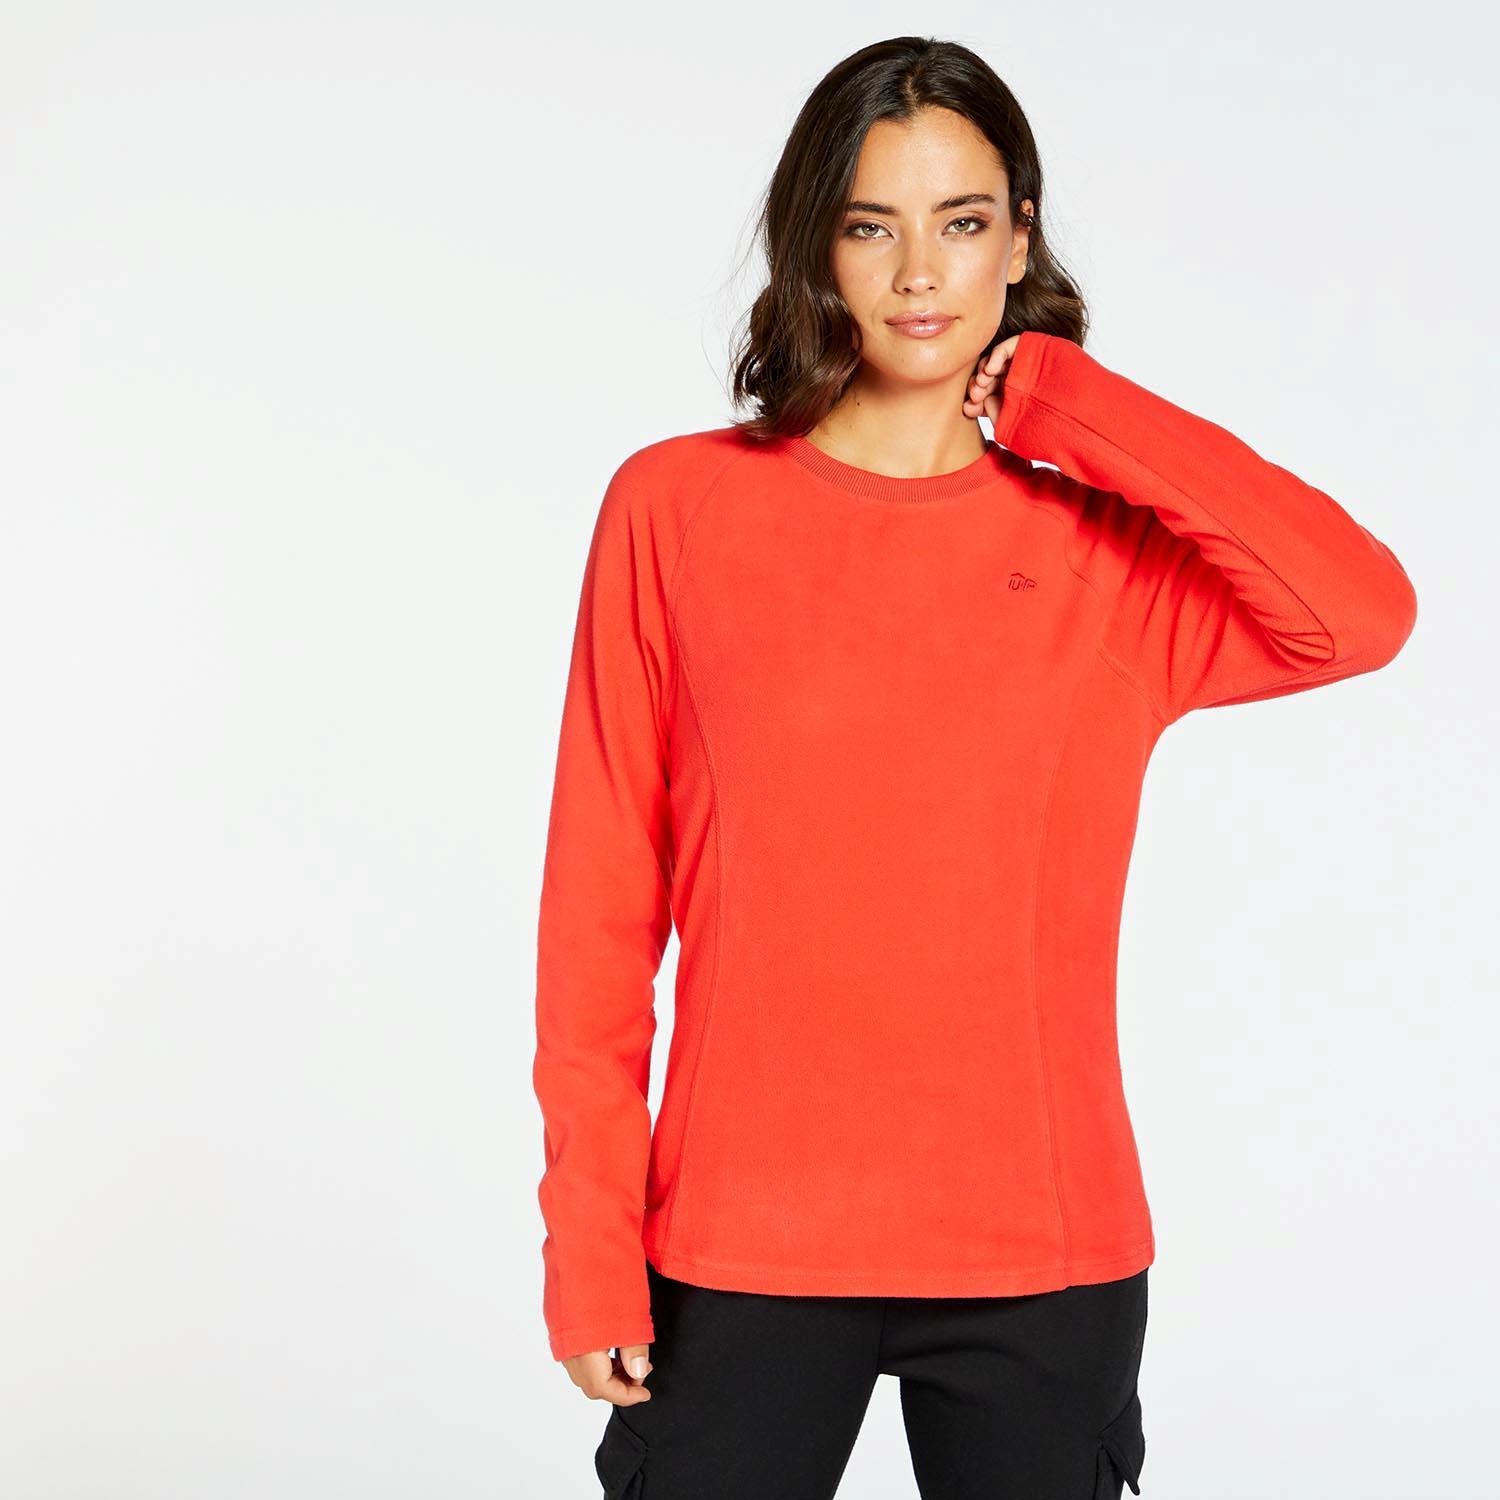 Up Basic - Rouge - Polaire Femme sports taille XL